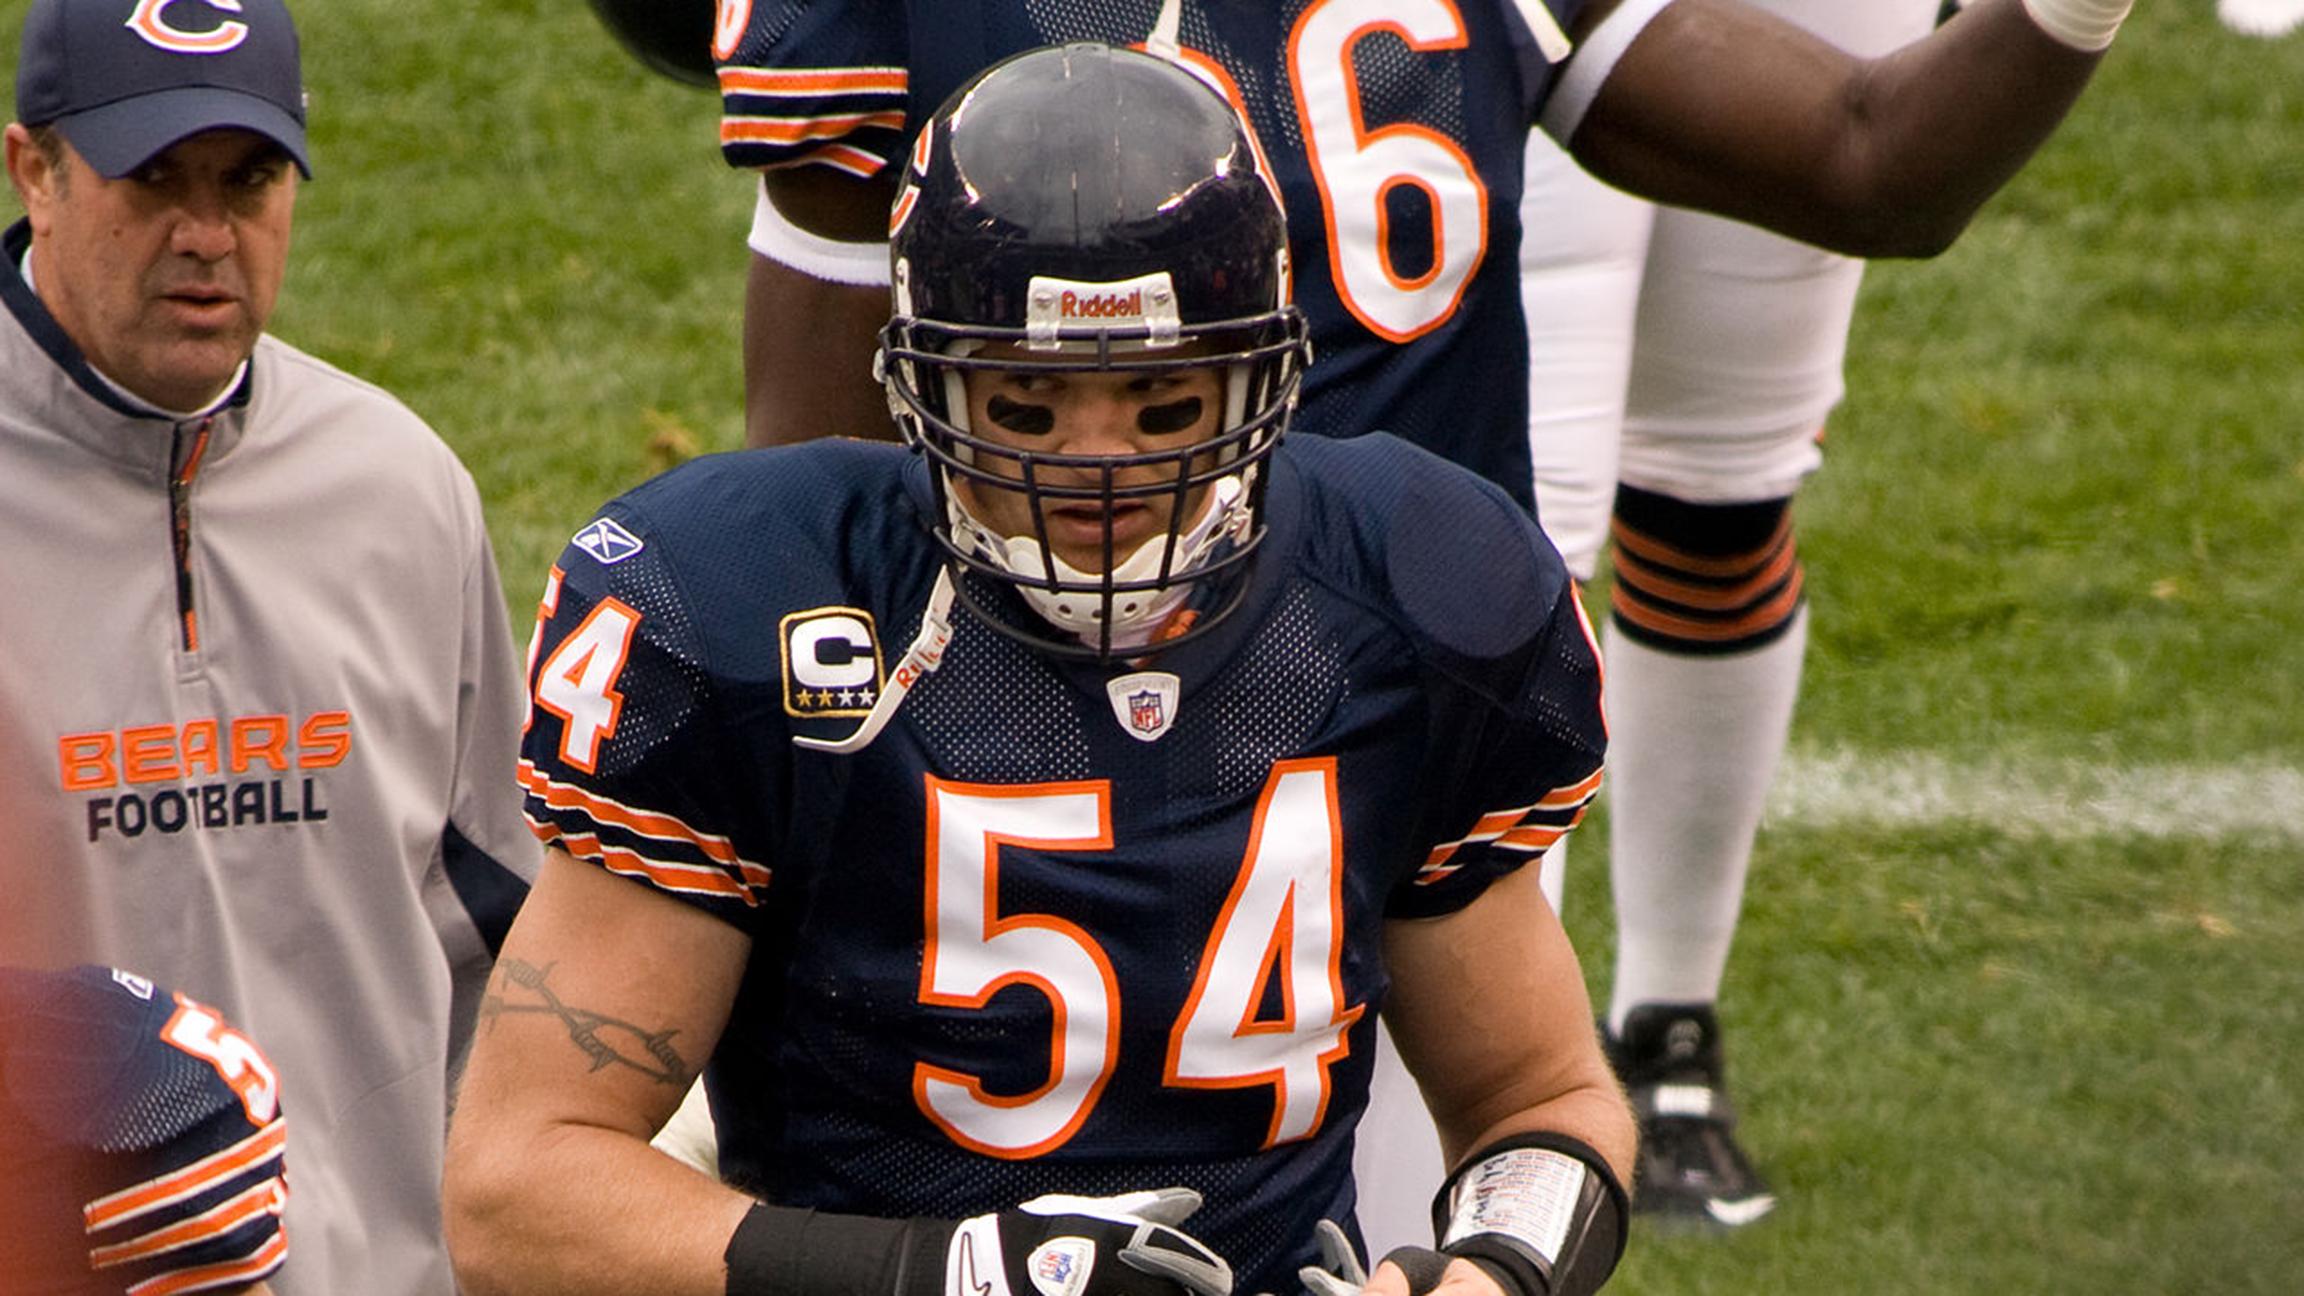 Brian Urlacher and Lance Briggs host a Bears block party on Saturday. (Jauerback / Wikimedia Commons)